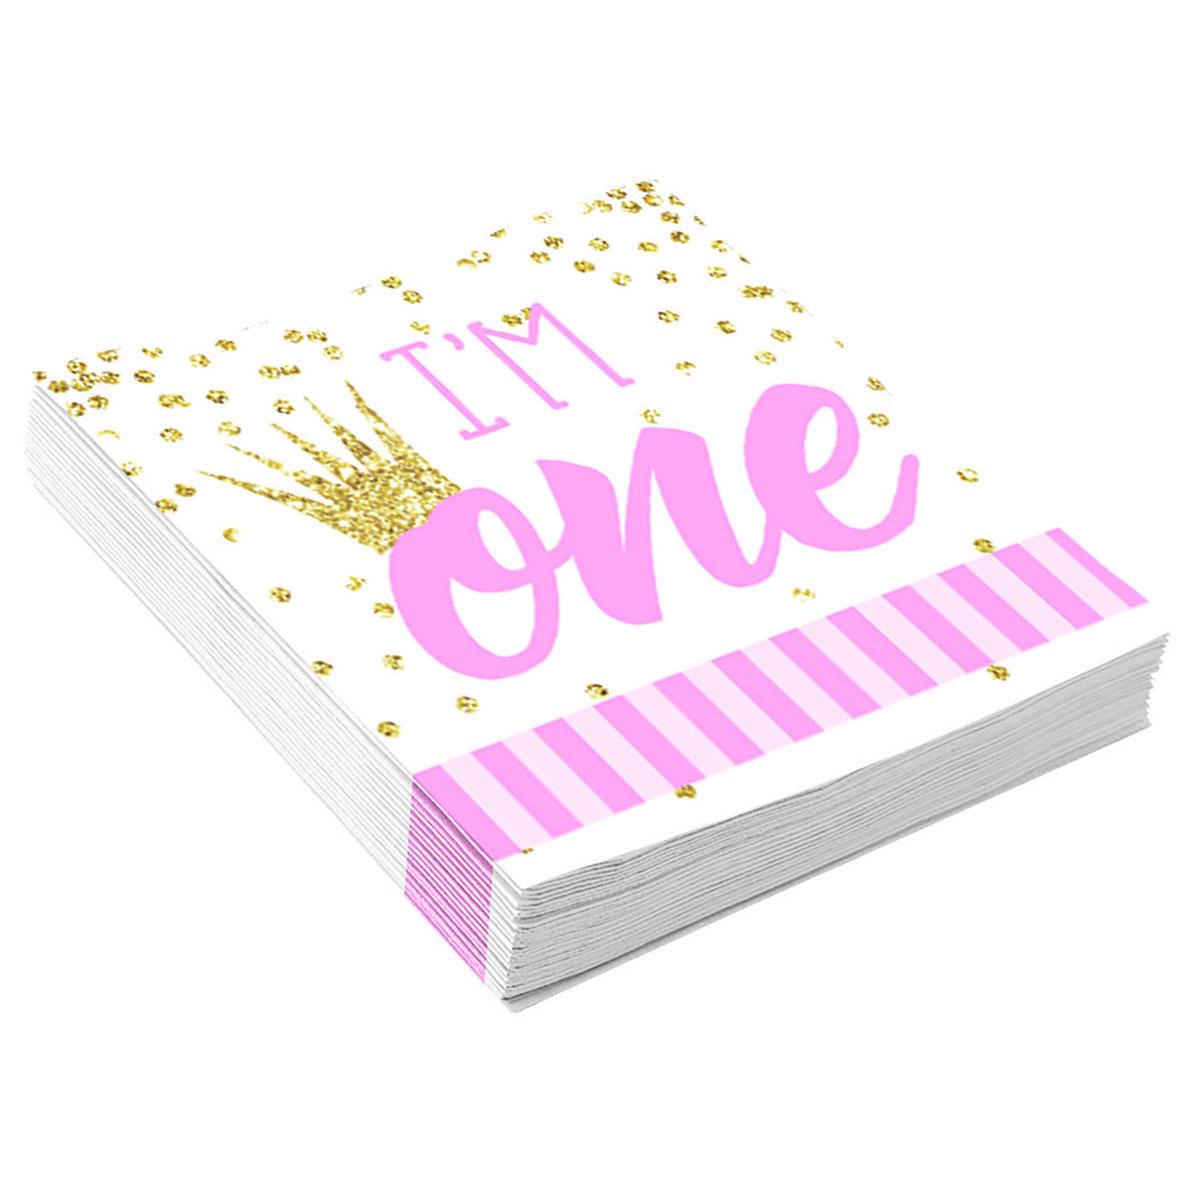 Baby's 1st Birthday 25cm cocktail paper napkin in pink with gold by Forum Novelties 79816 available here at Karnival Costumes online party shop